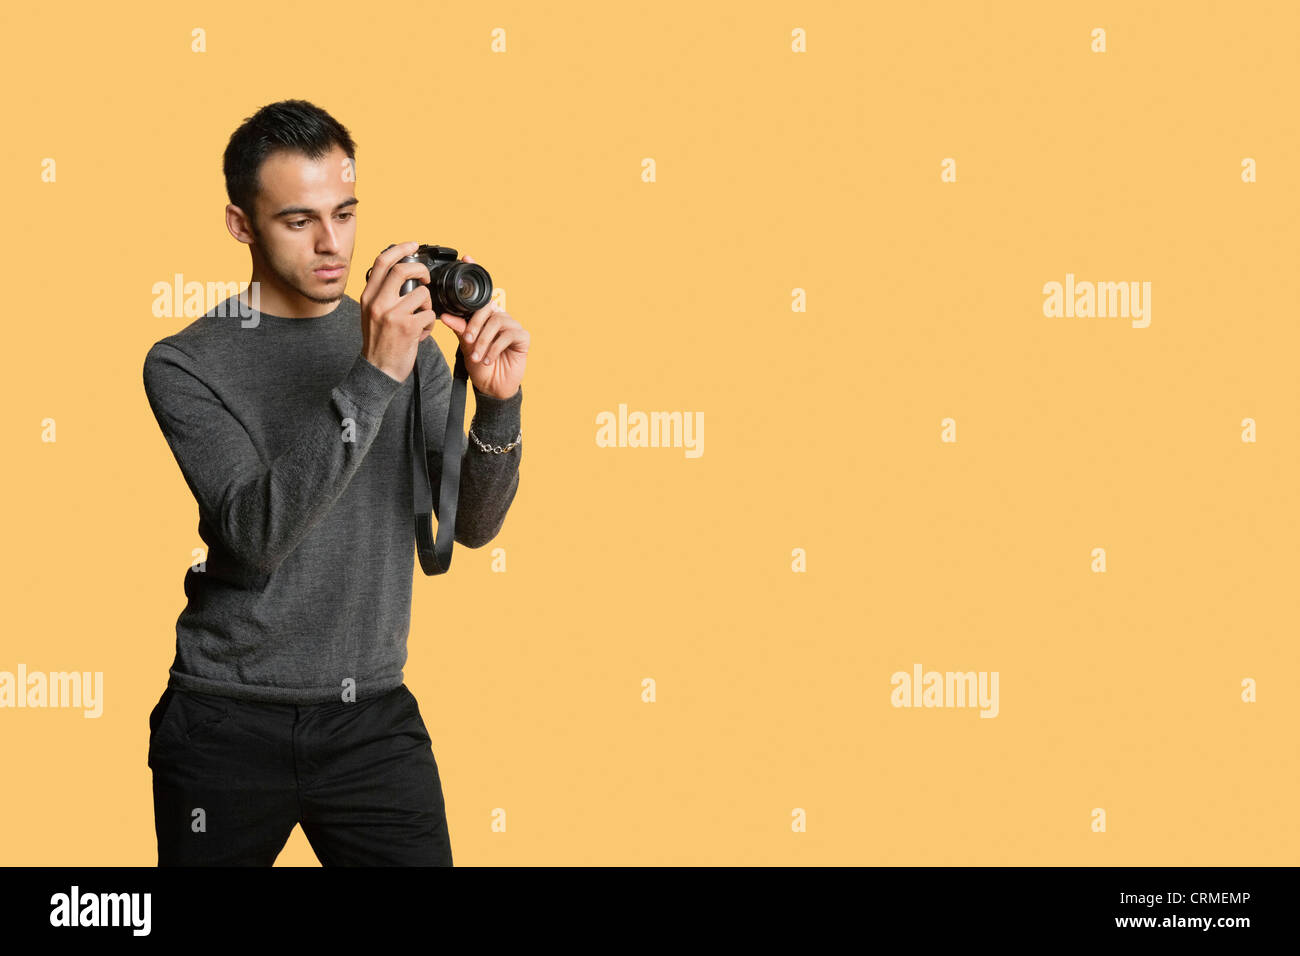 confident young man with digital camera over colored background Stock Photo